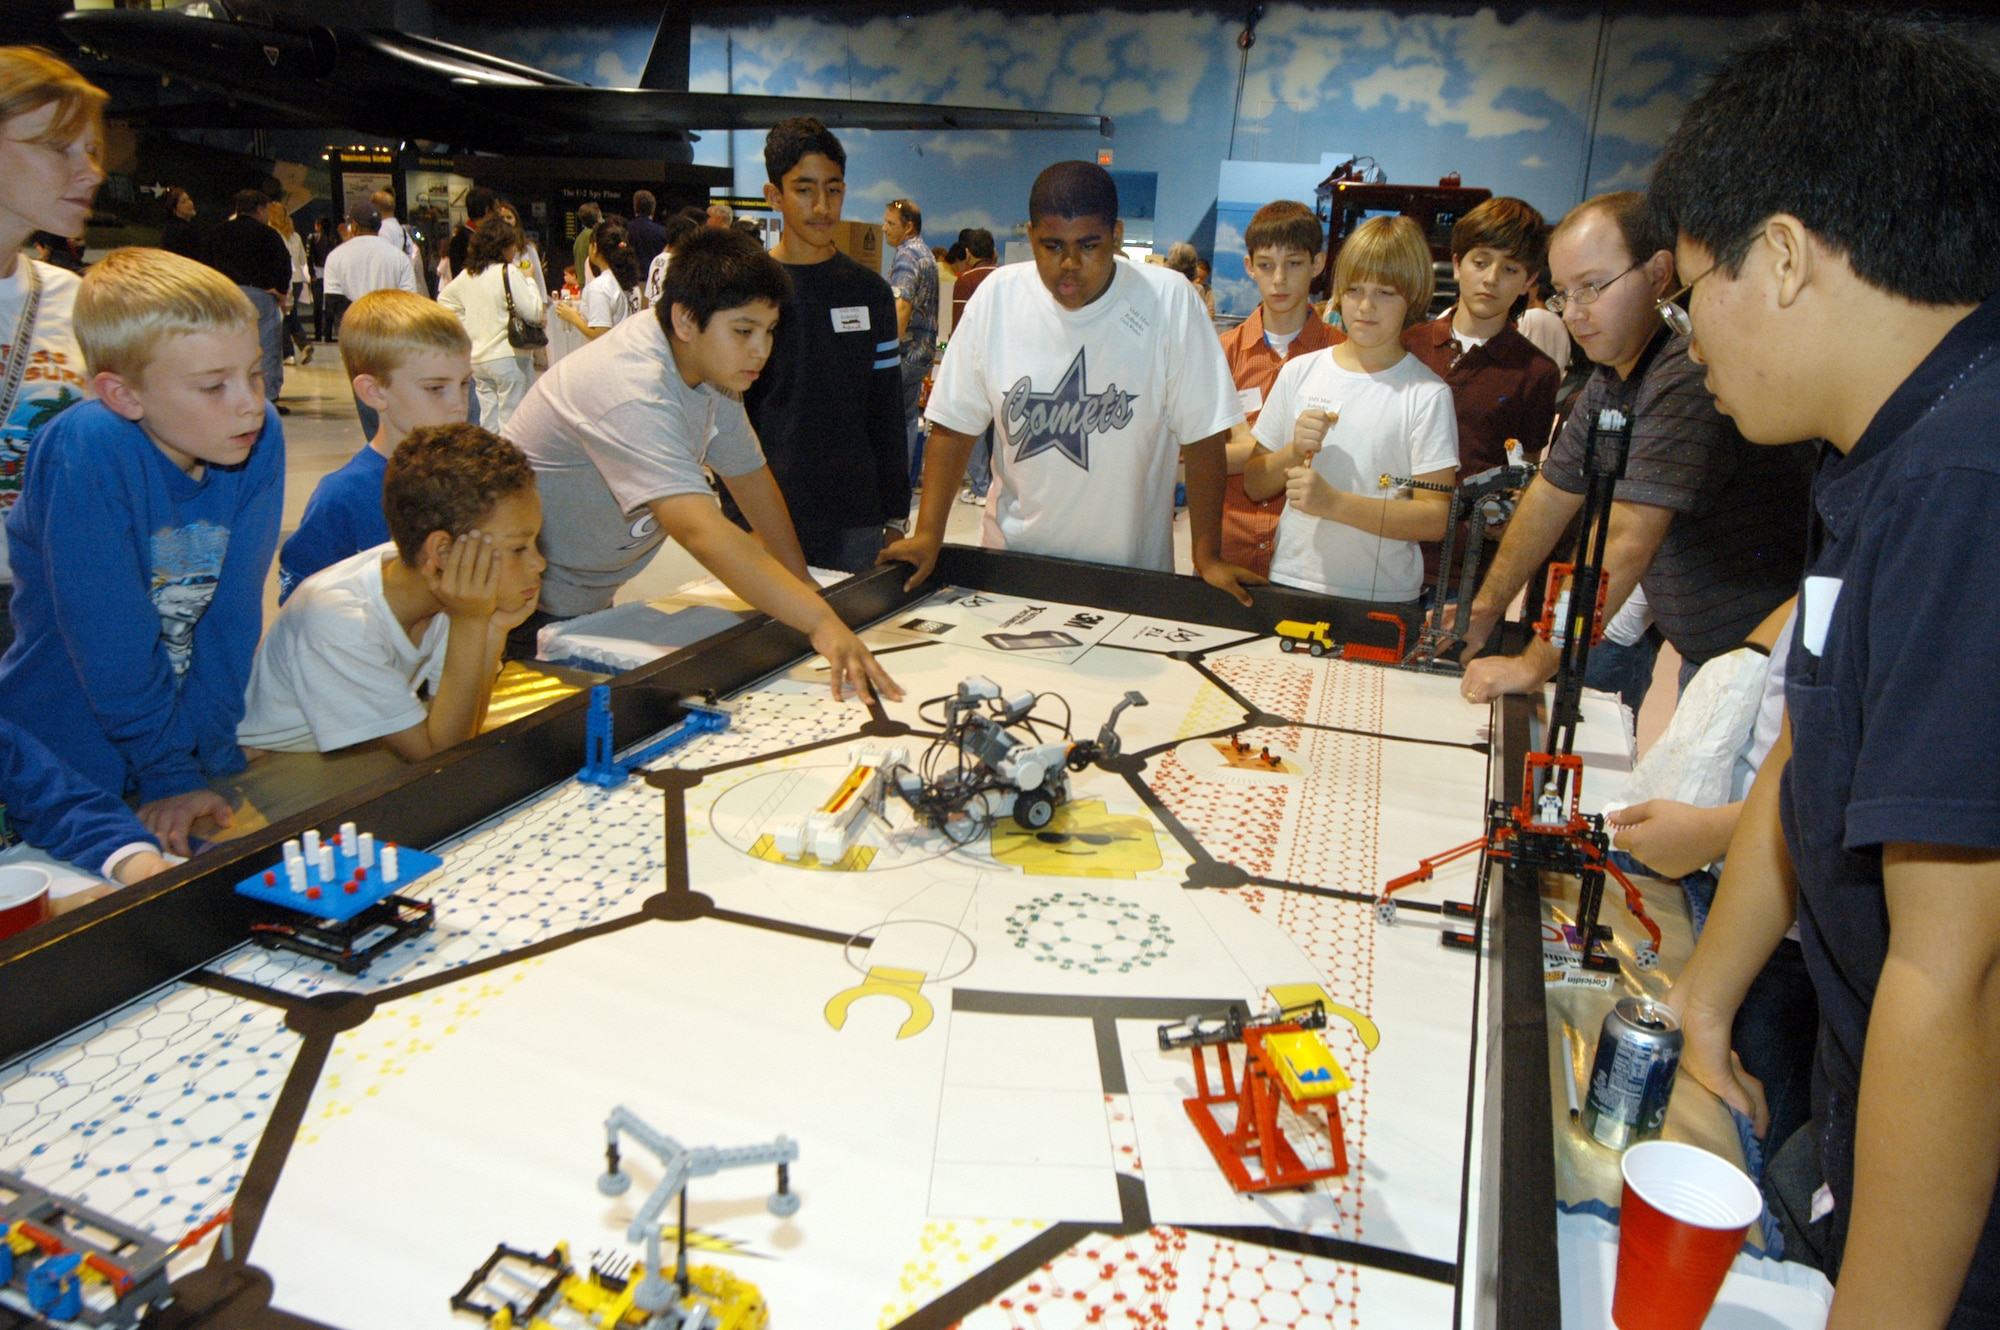 Participants in the FIRST (For Inspiration and Recognition of Science and Technology) Regional Lego League Robotics competition Saturday tweak their robots on a practice table.  U.S. Air Force photo by Sue Sapp.